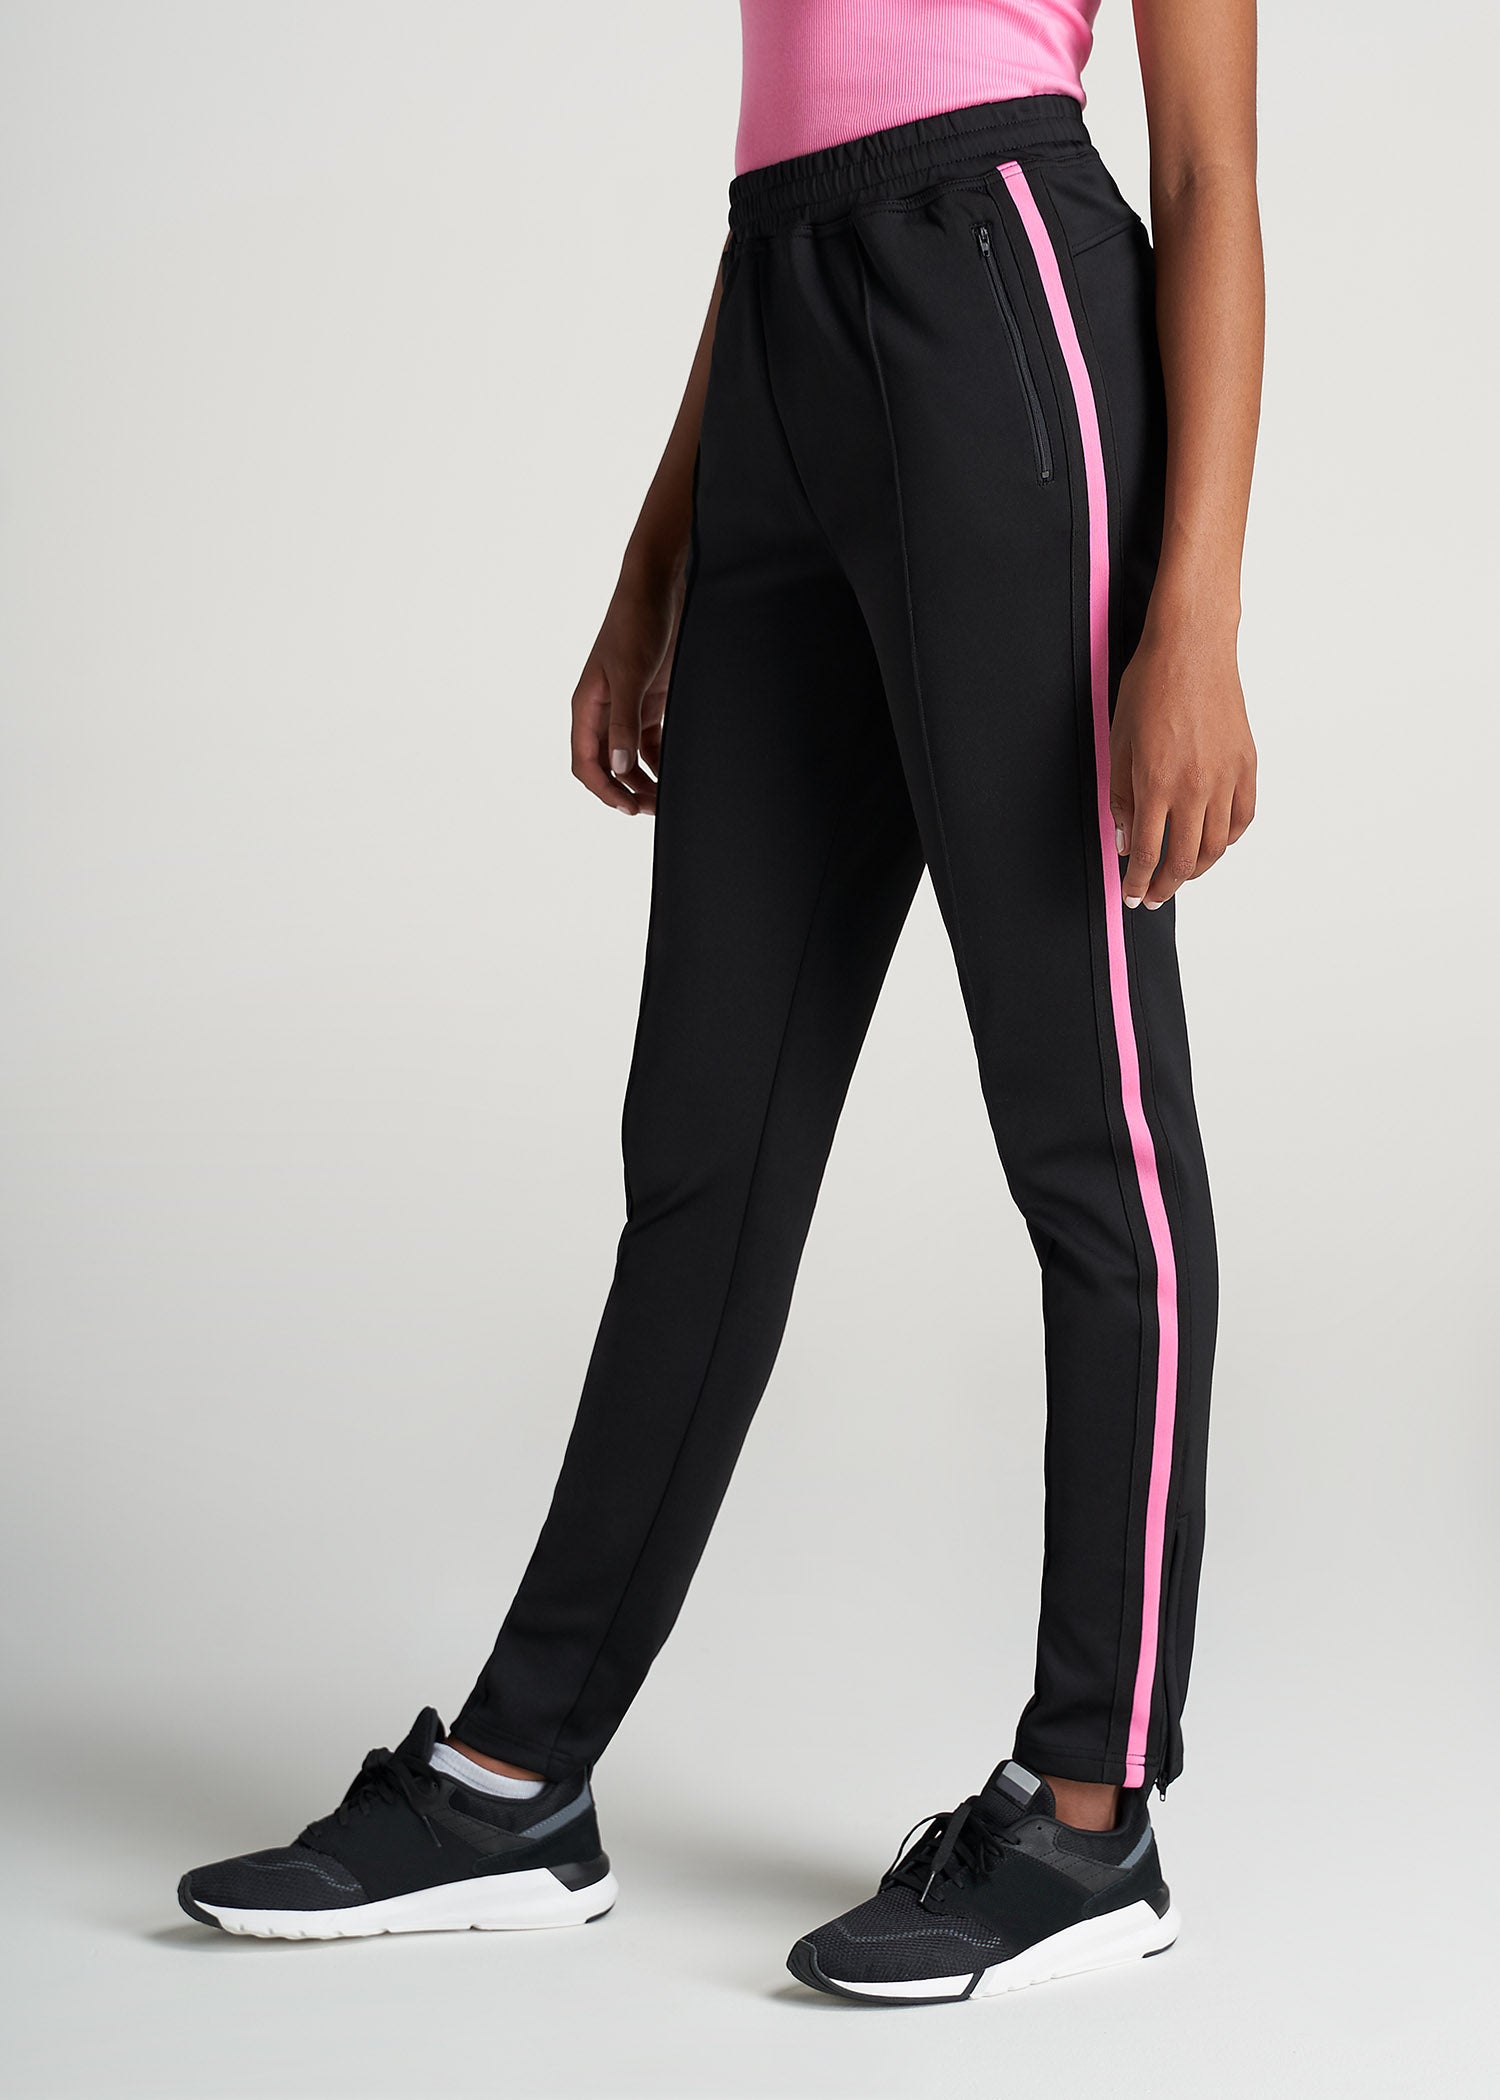 Athletic Wear for Women: Tall Black Pink Stripe Athletic Pant – American  Tall